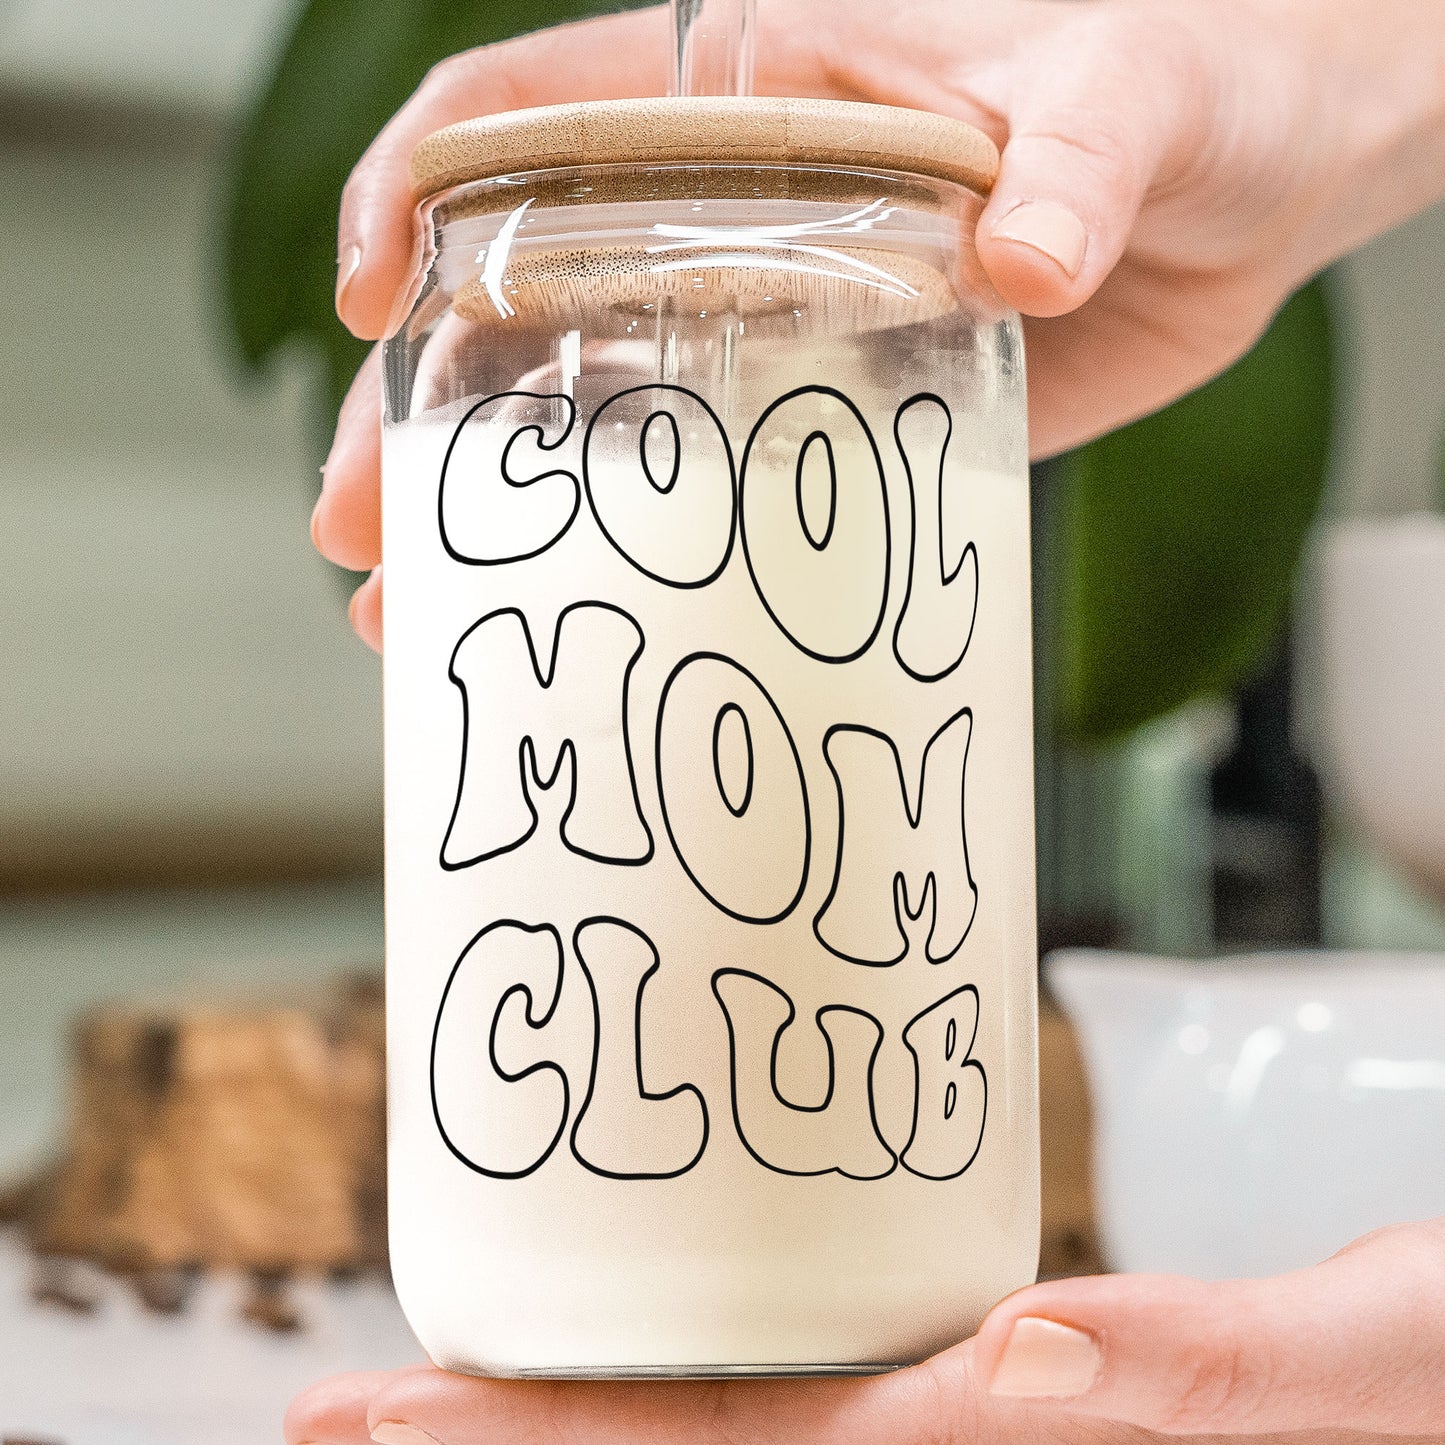 Cool Mom Club Custom Birthflower Gift For Mom - Personalized Clear Glass Cup